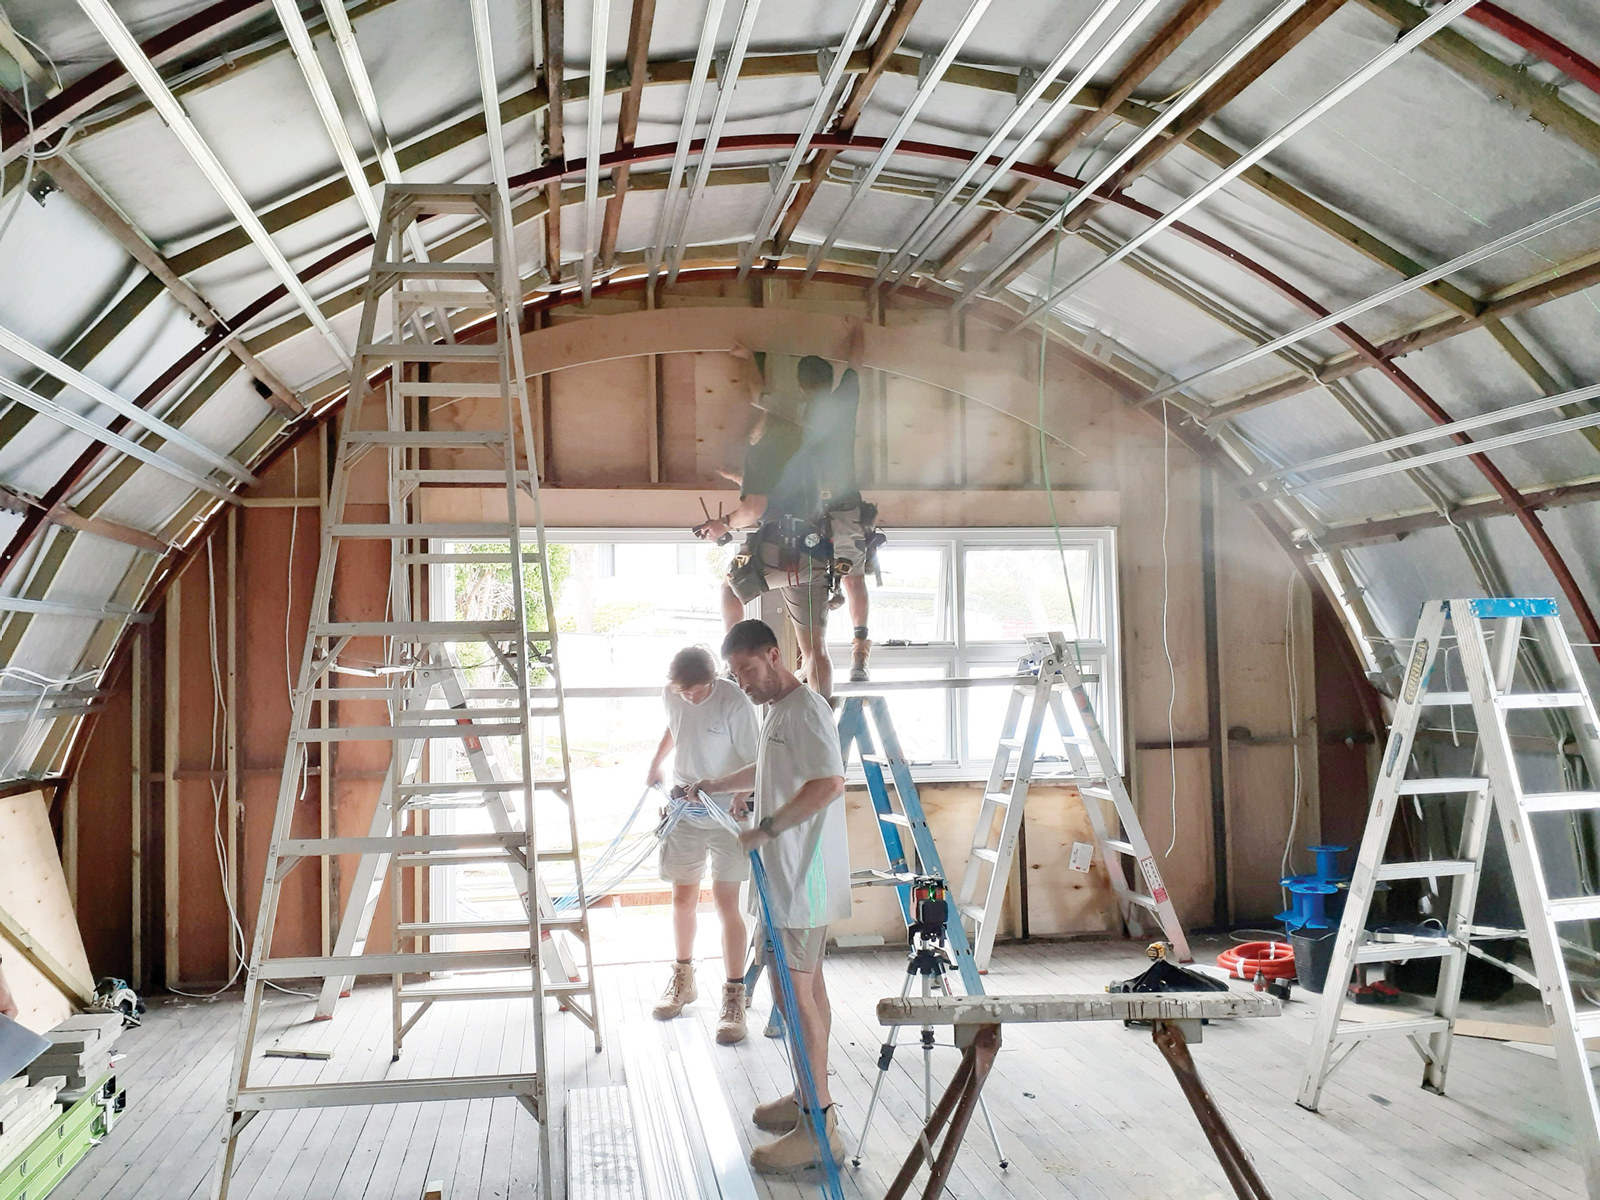 Builders make progress with new ceiling linings and fit-out in the Nissen Hut